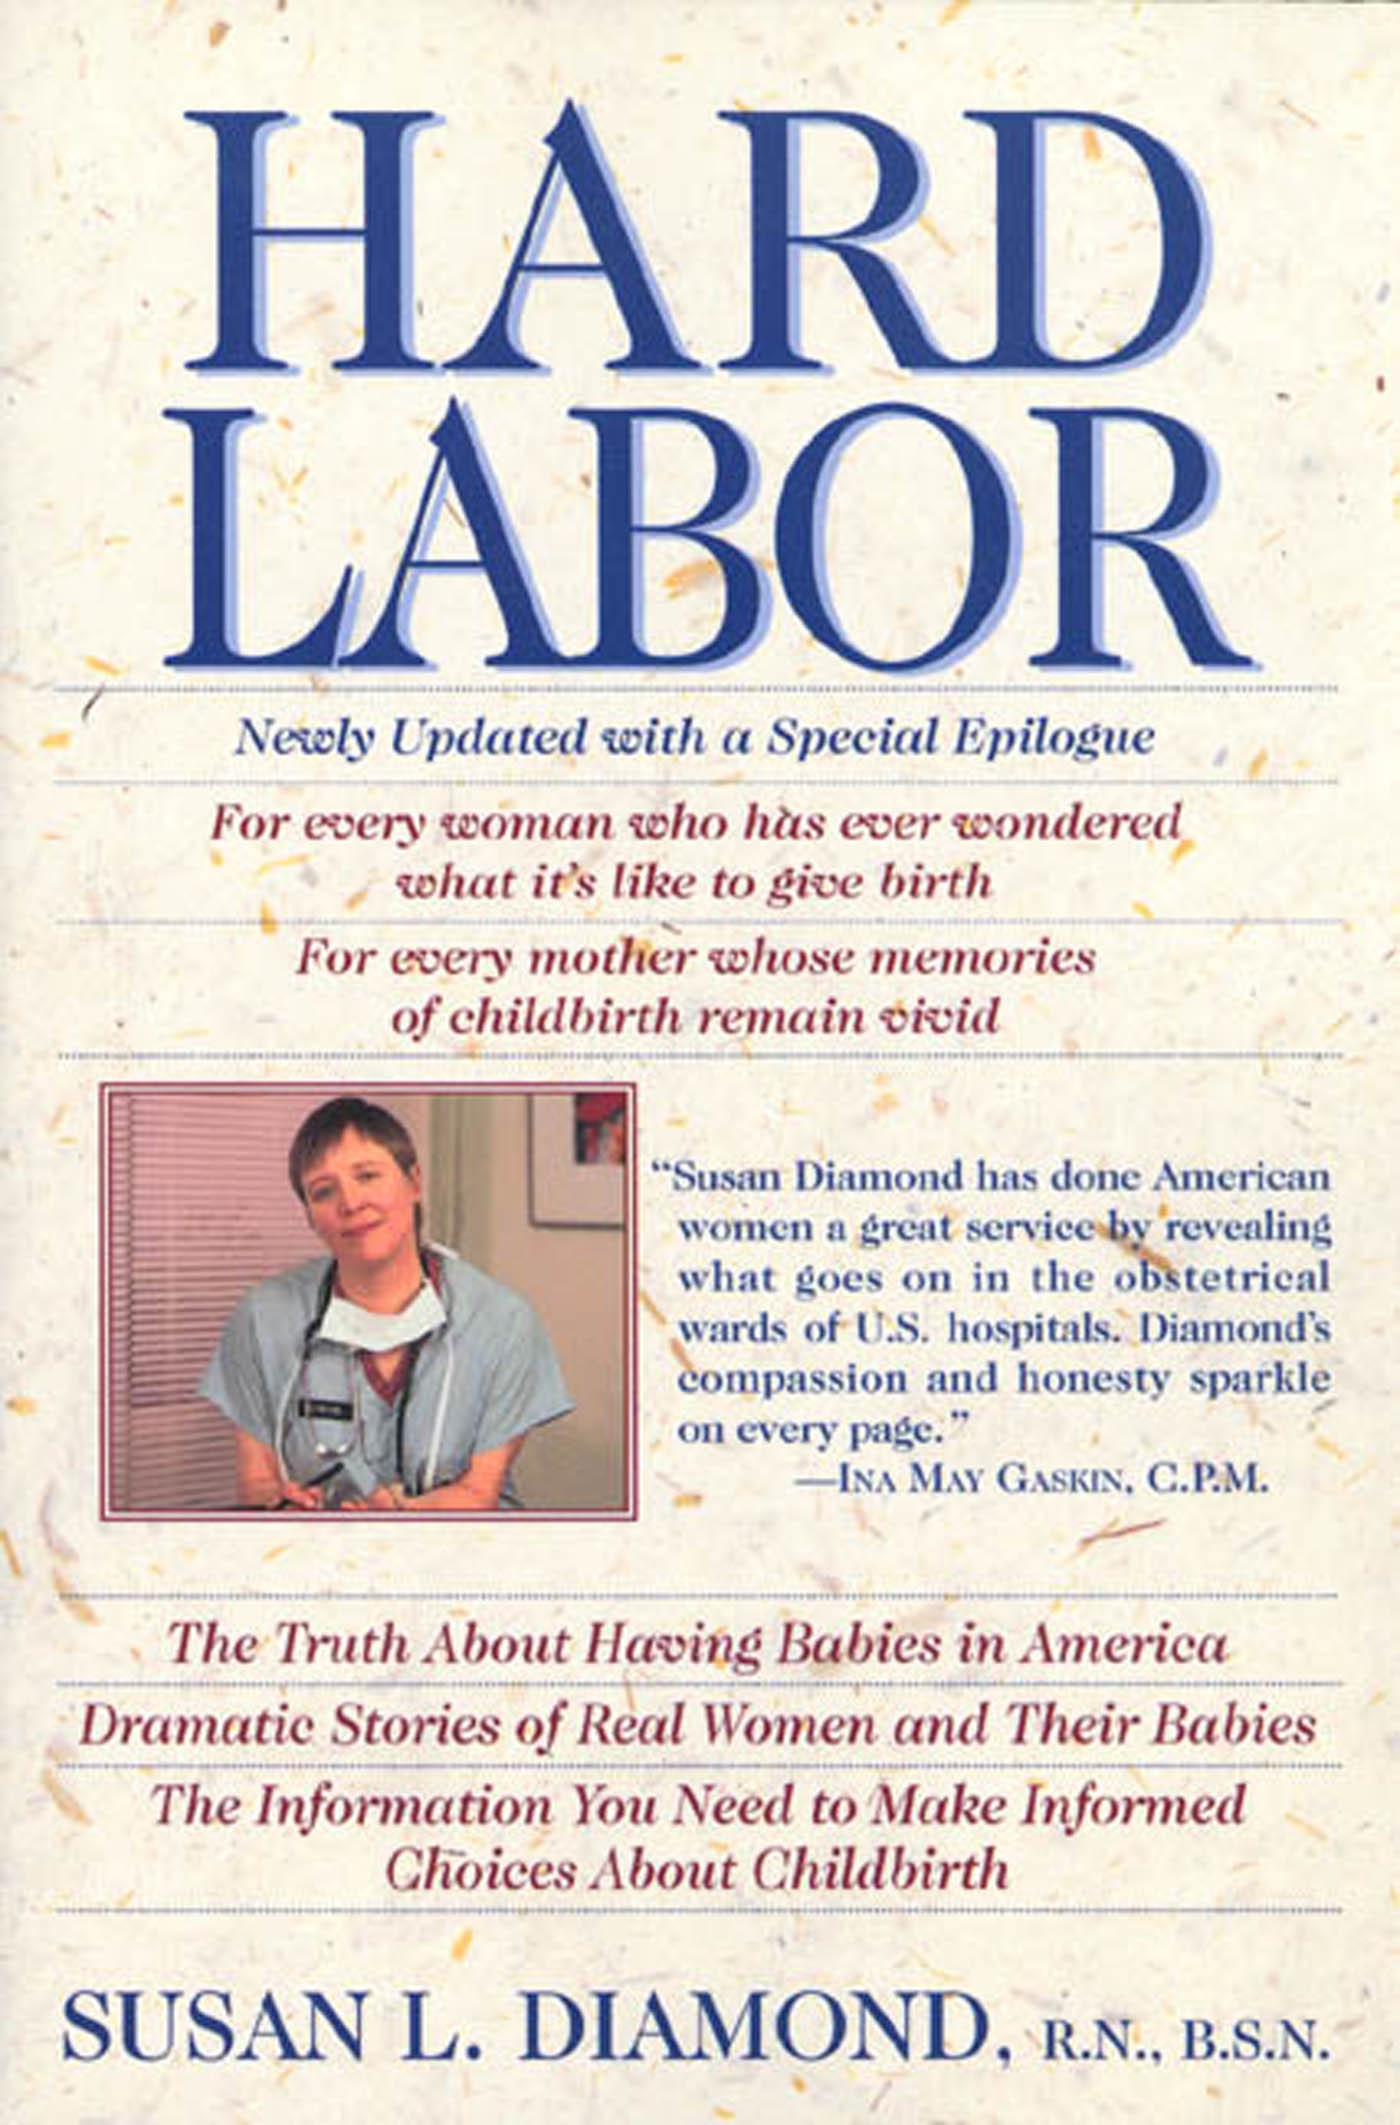 Hard Labor : Reflections of an Obstetrical Nurse by Susan L. Diamond